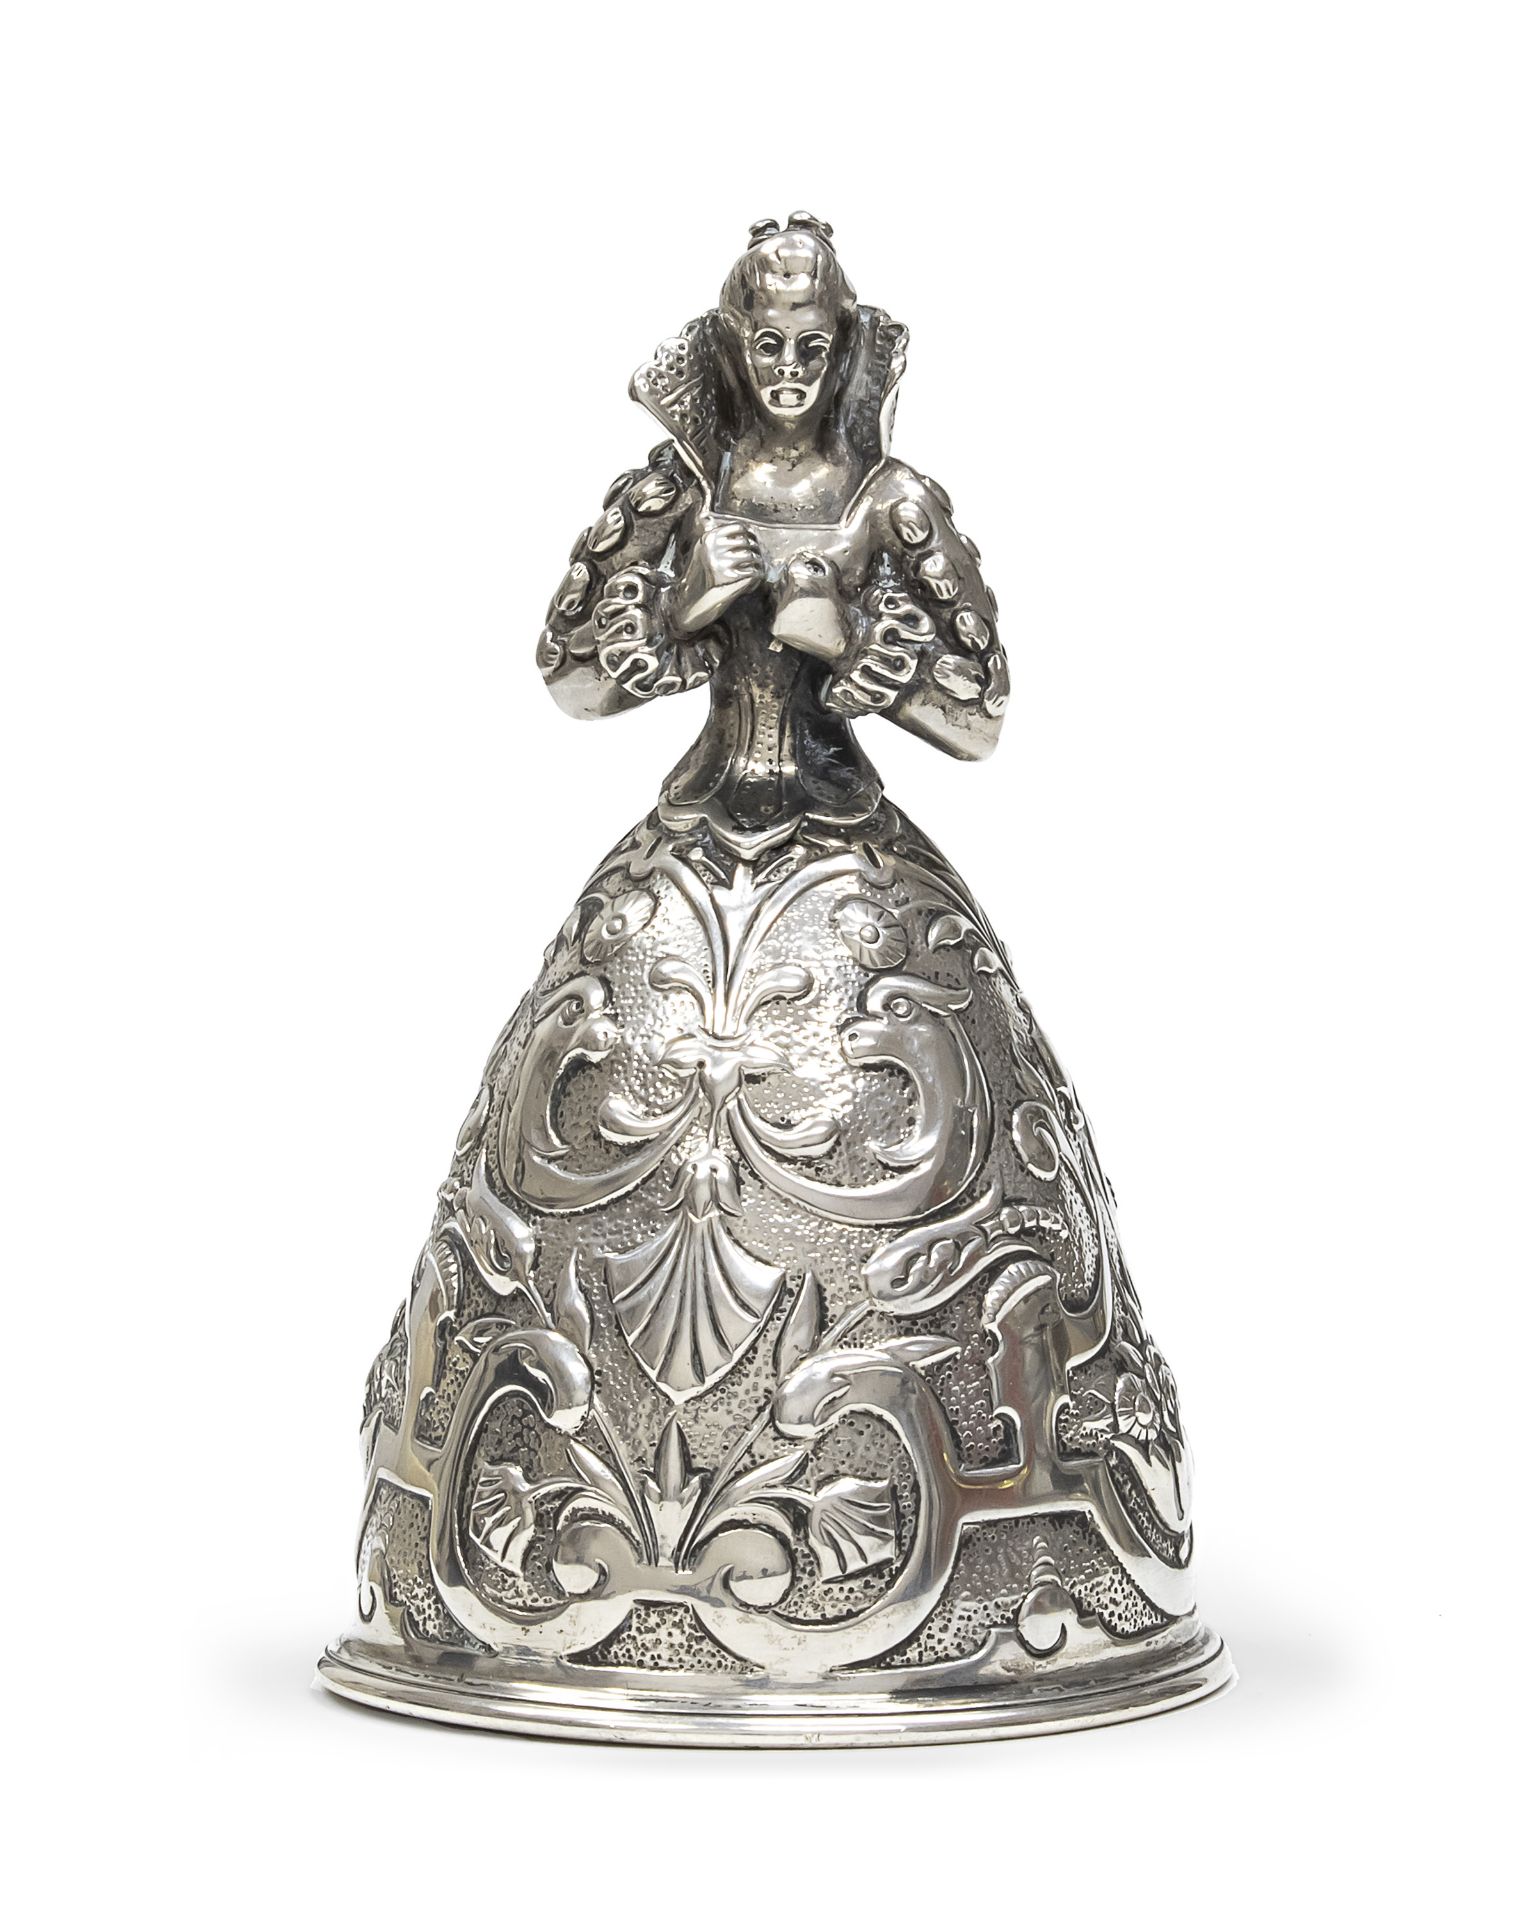 SILVER BELL GERMANY MID 19TH CENTURY